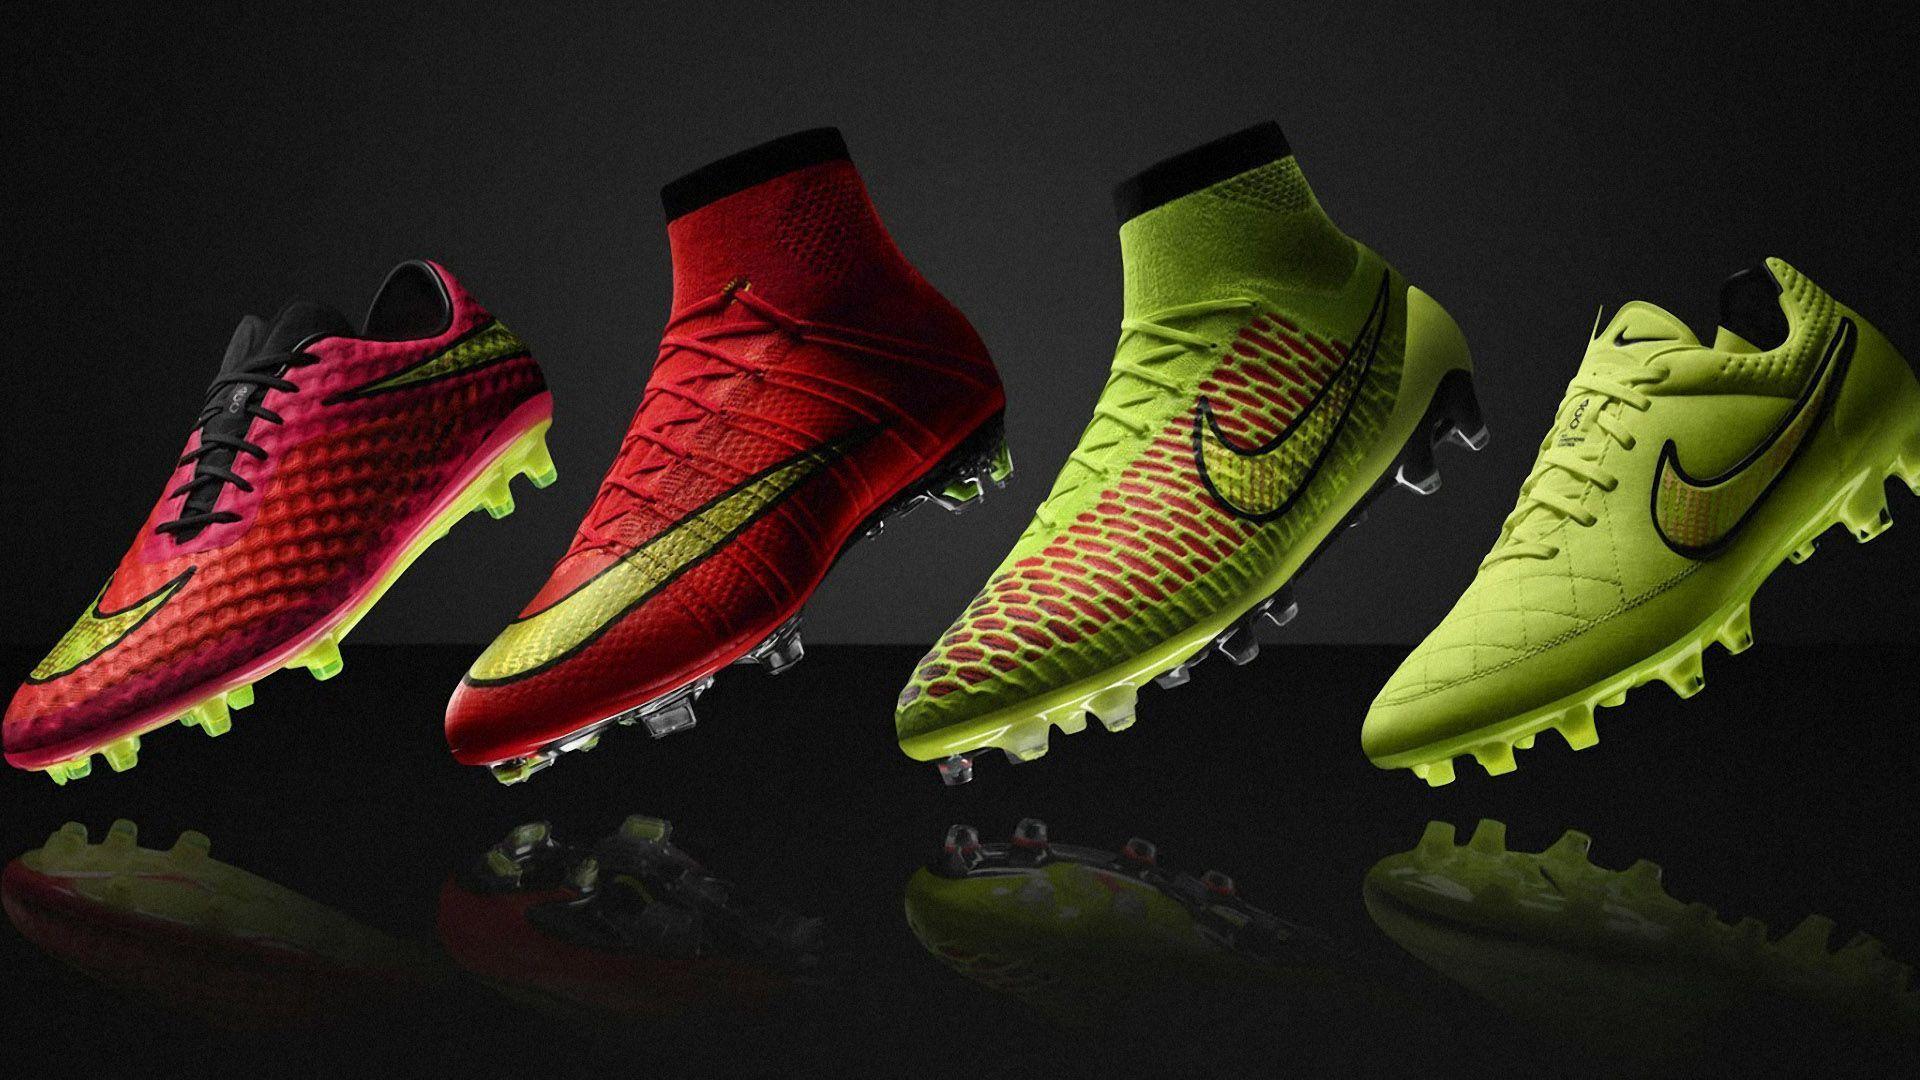 Nike Summer 2014 World Cup Football Boots Wallpaper Wide or HD